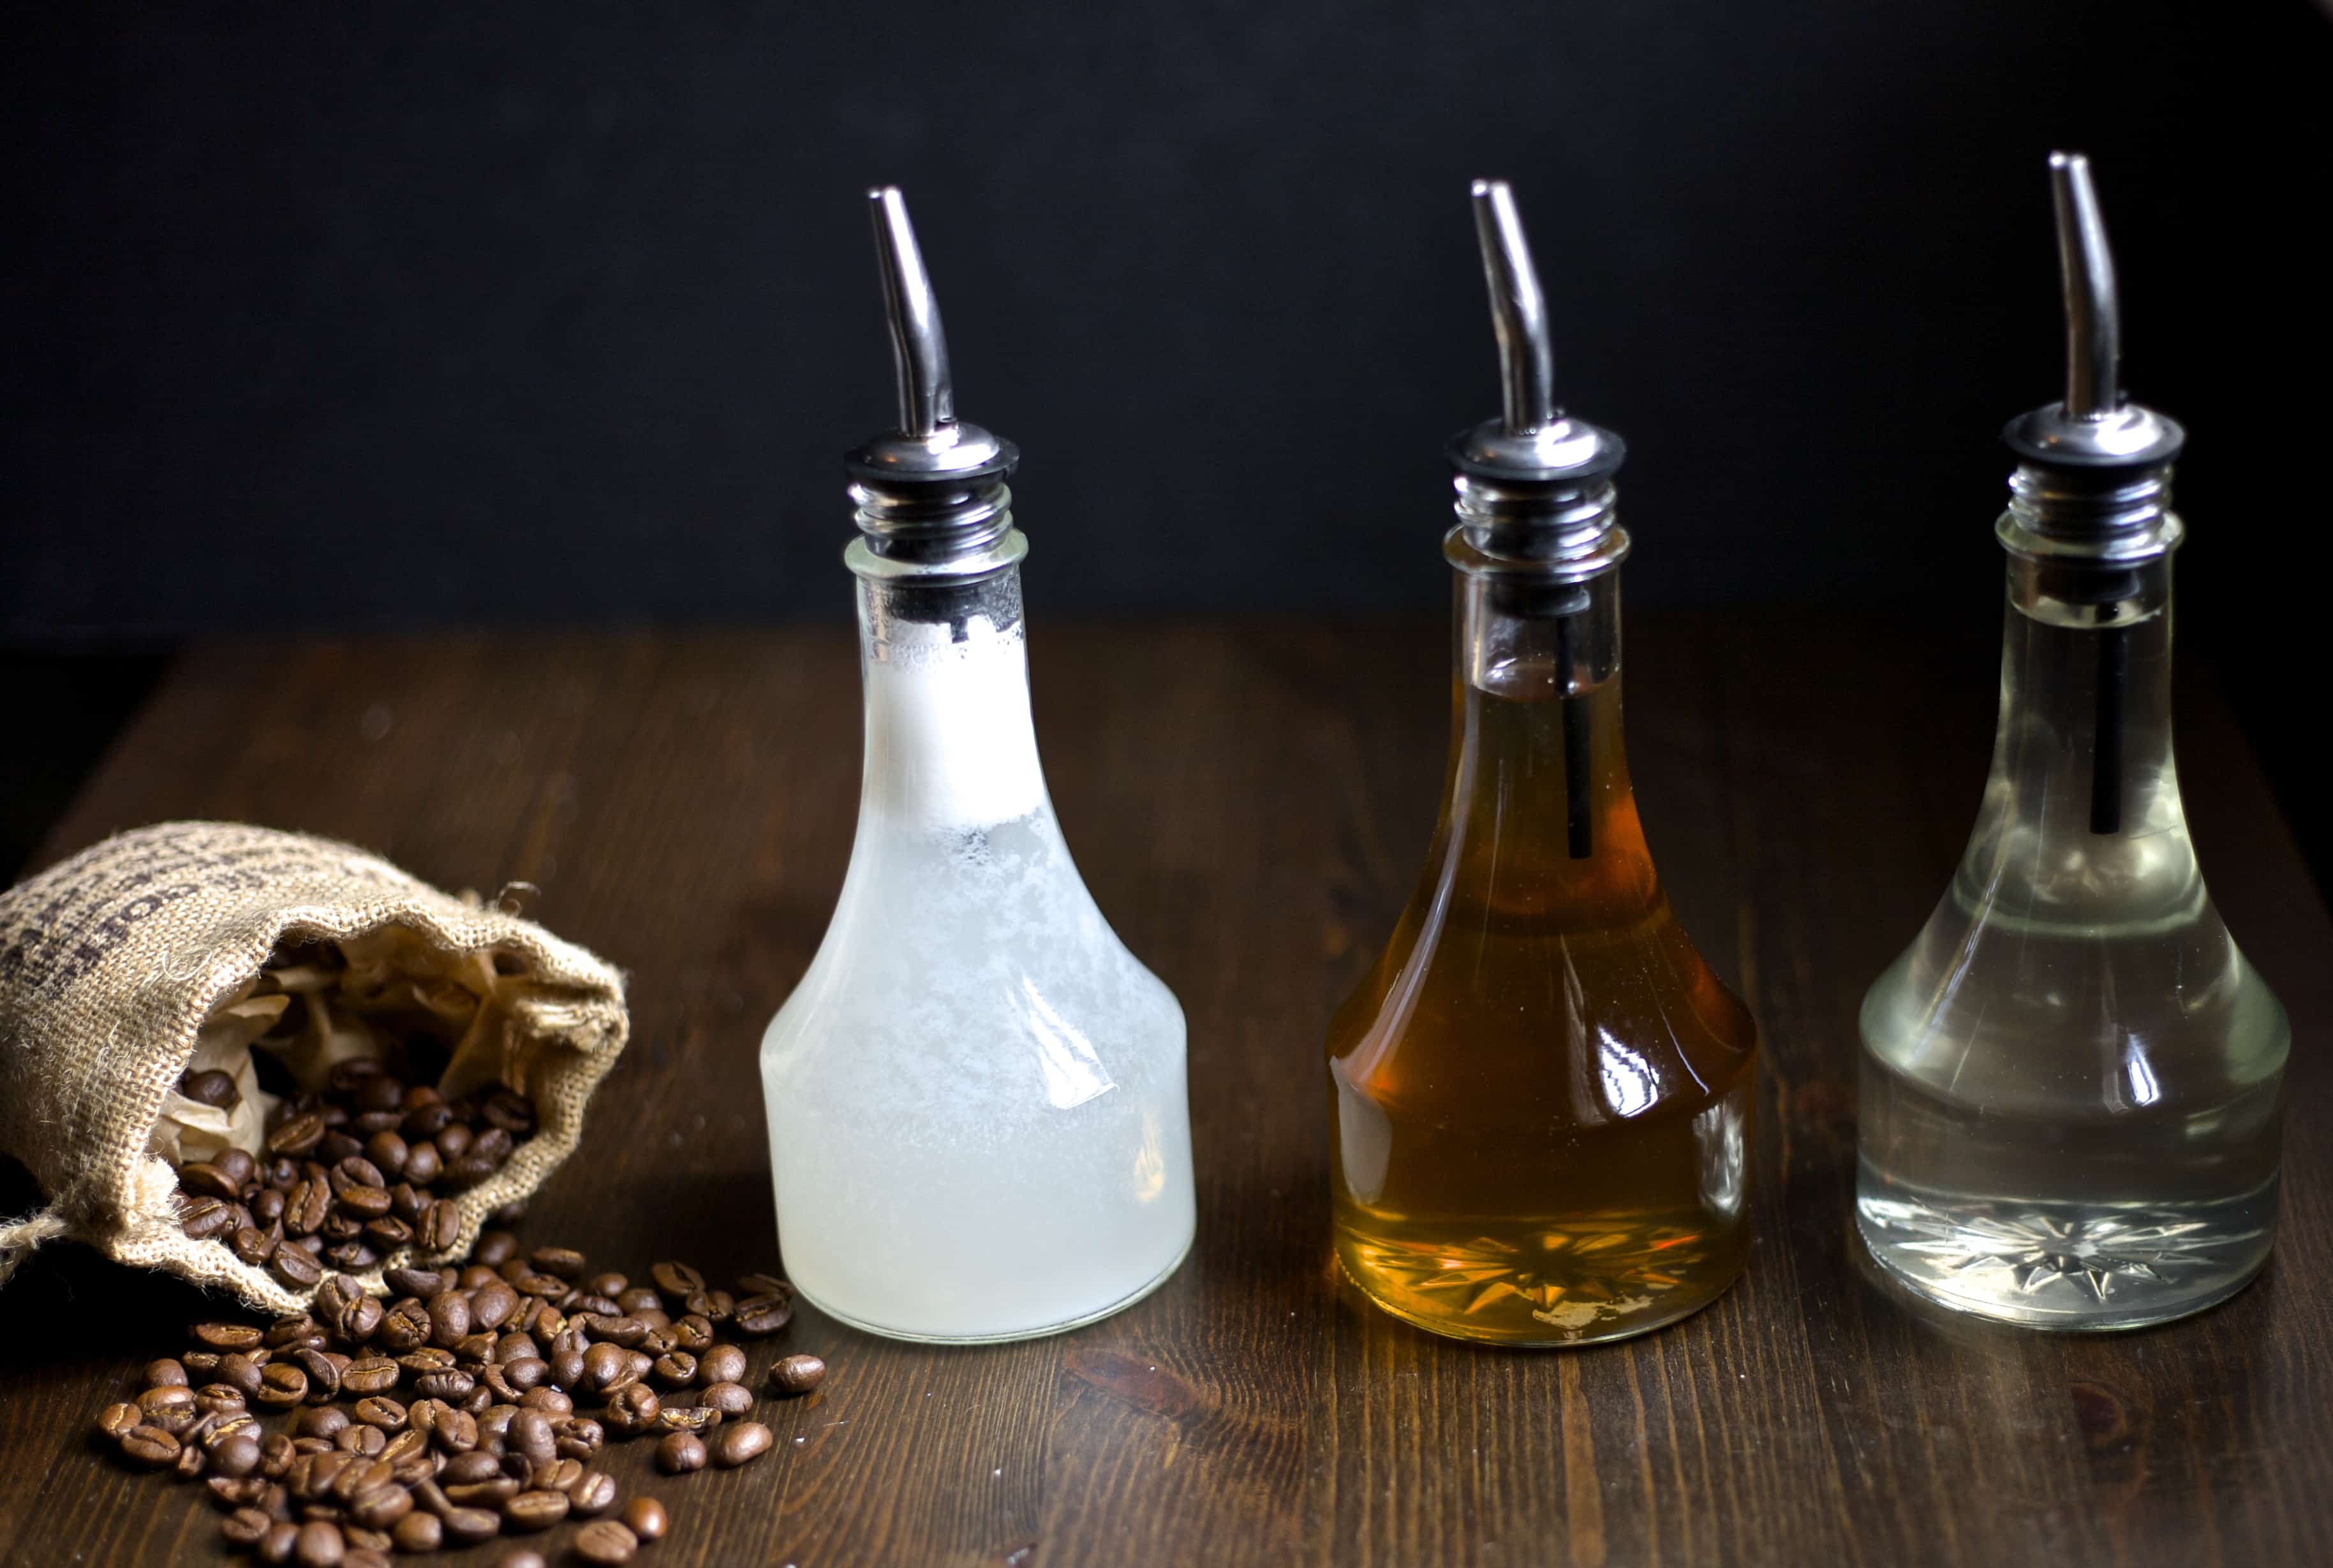 Homemade Flavored Coffee Syrups - The Domestic Dietitian